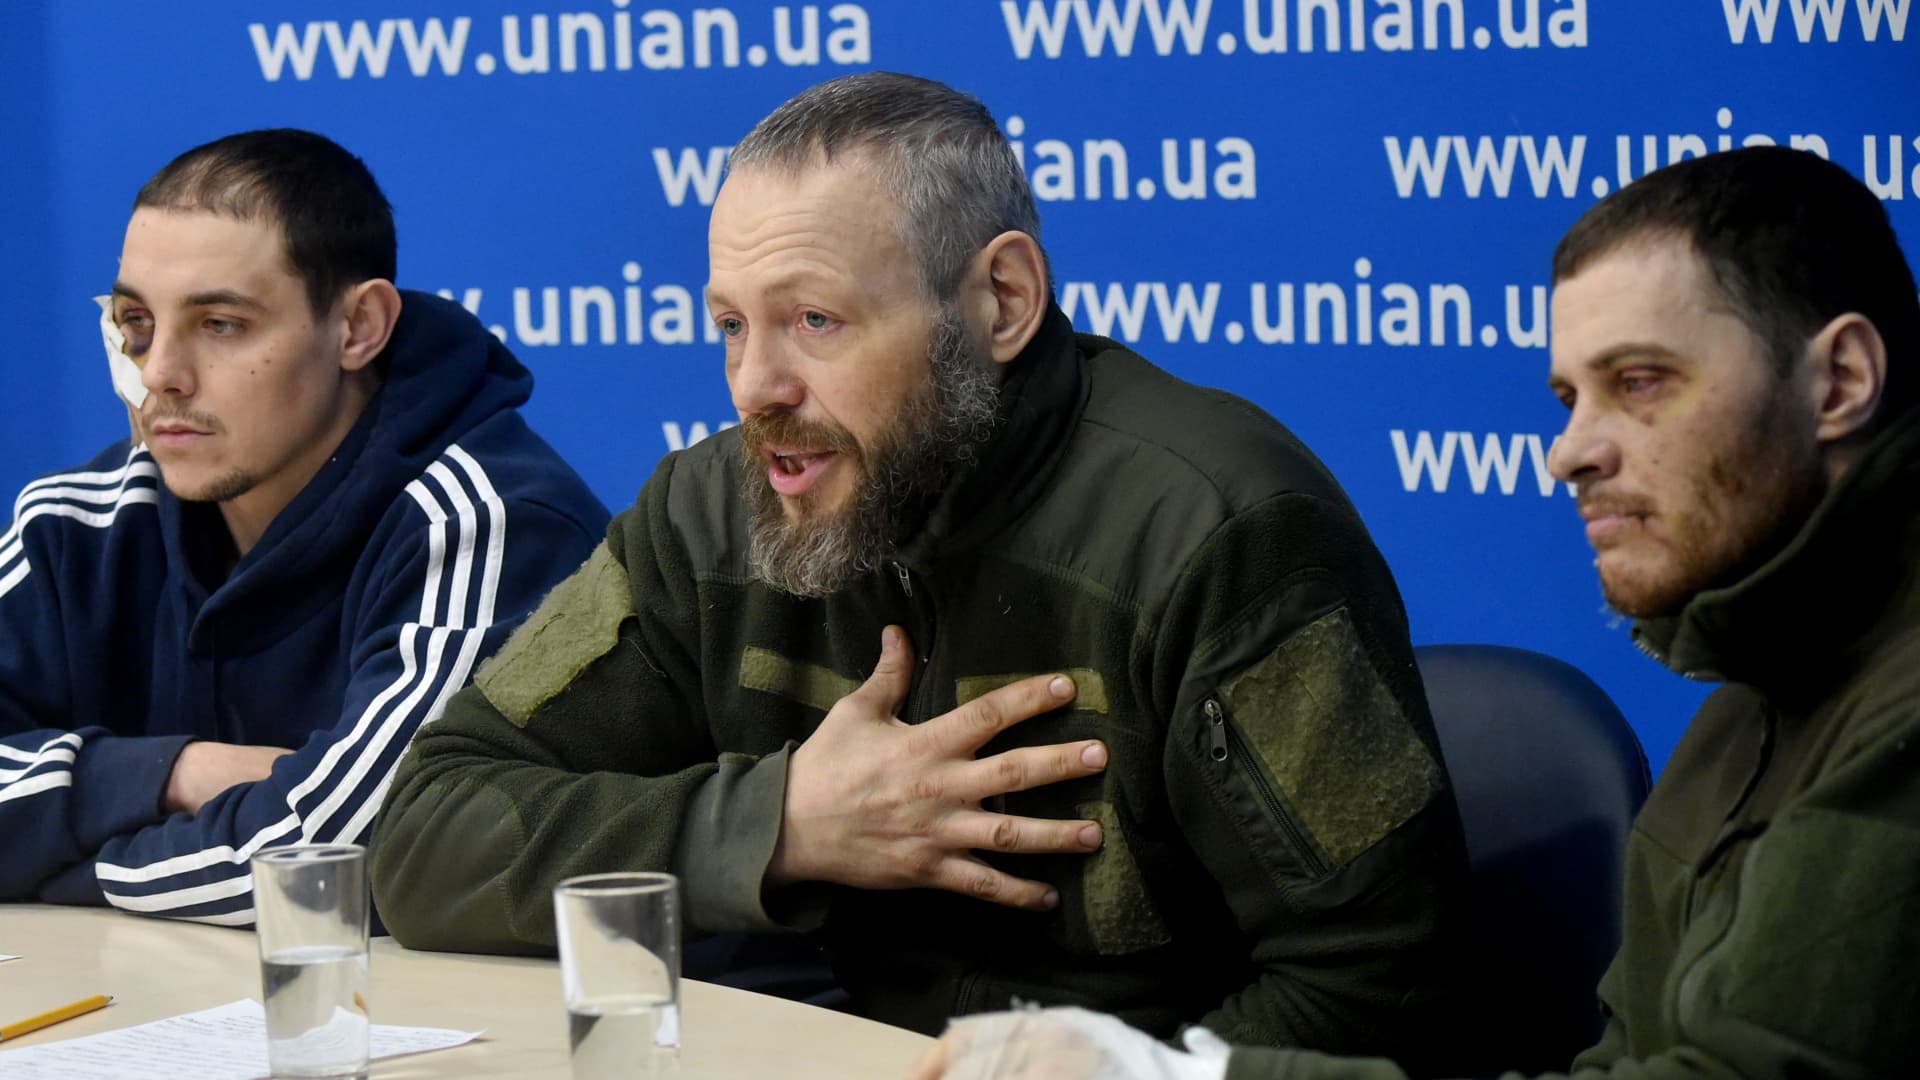 Russian prisoners of war, officers of the police sergeant Yevgeniy Plotnikov, lieutenant colonel Dmitriy Astakhov, and captain Yevgeniy Spiridonov are presented to the press in Ukrainian capital of Kyiv on March 2, 2022.